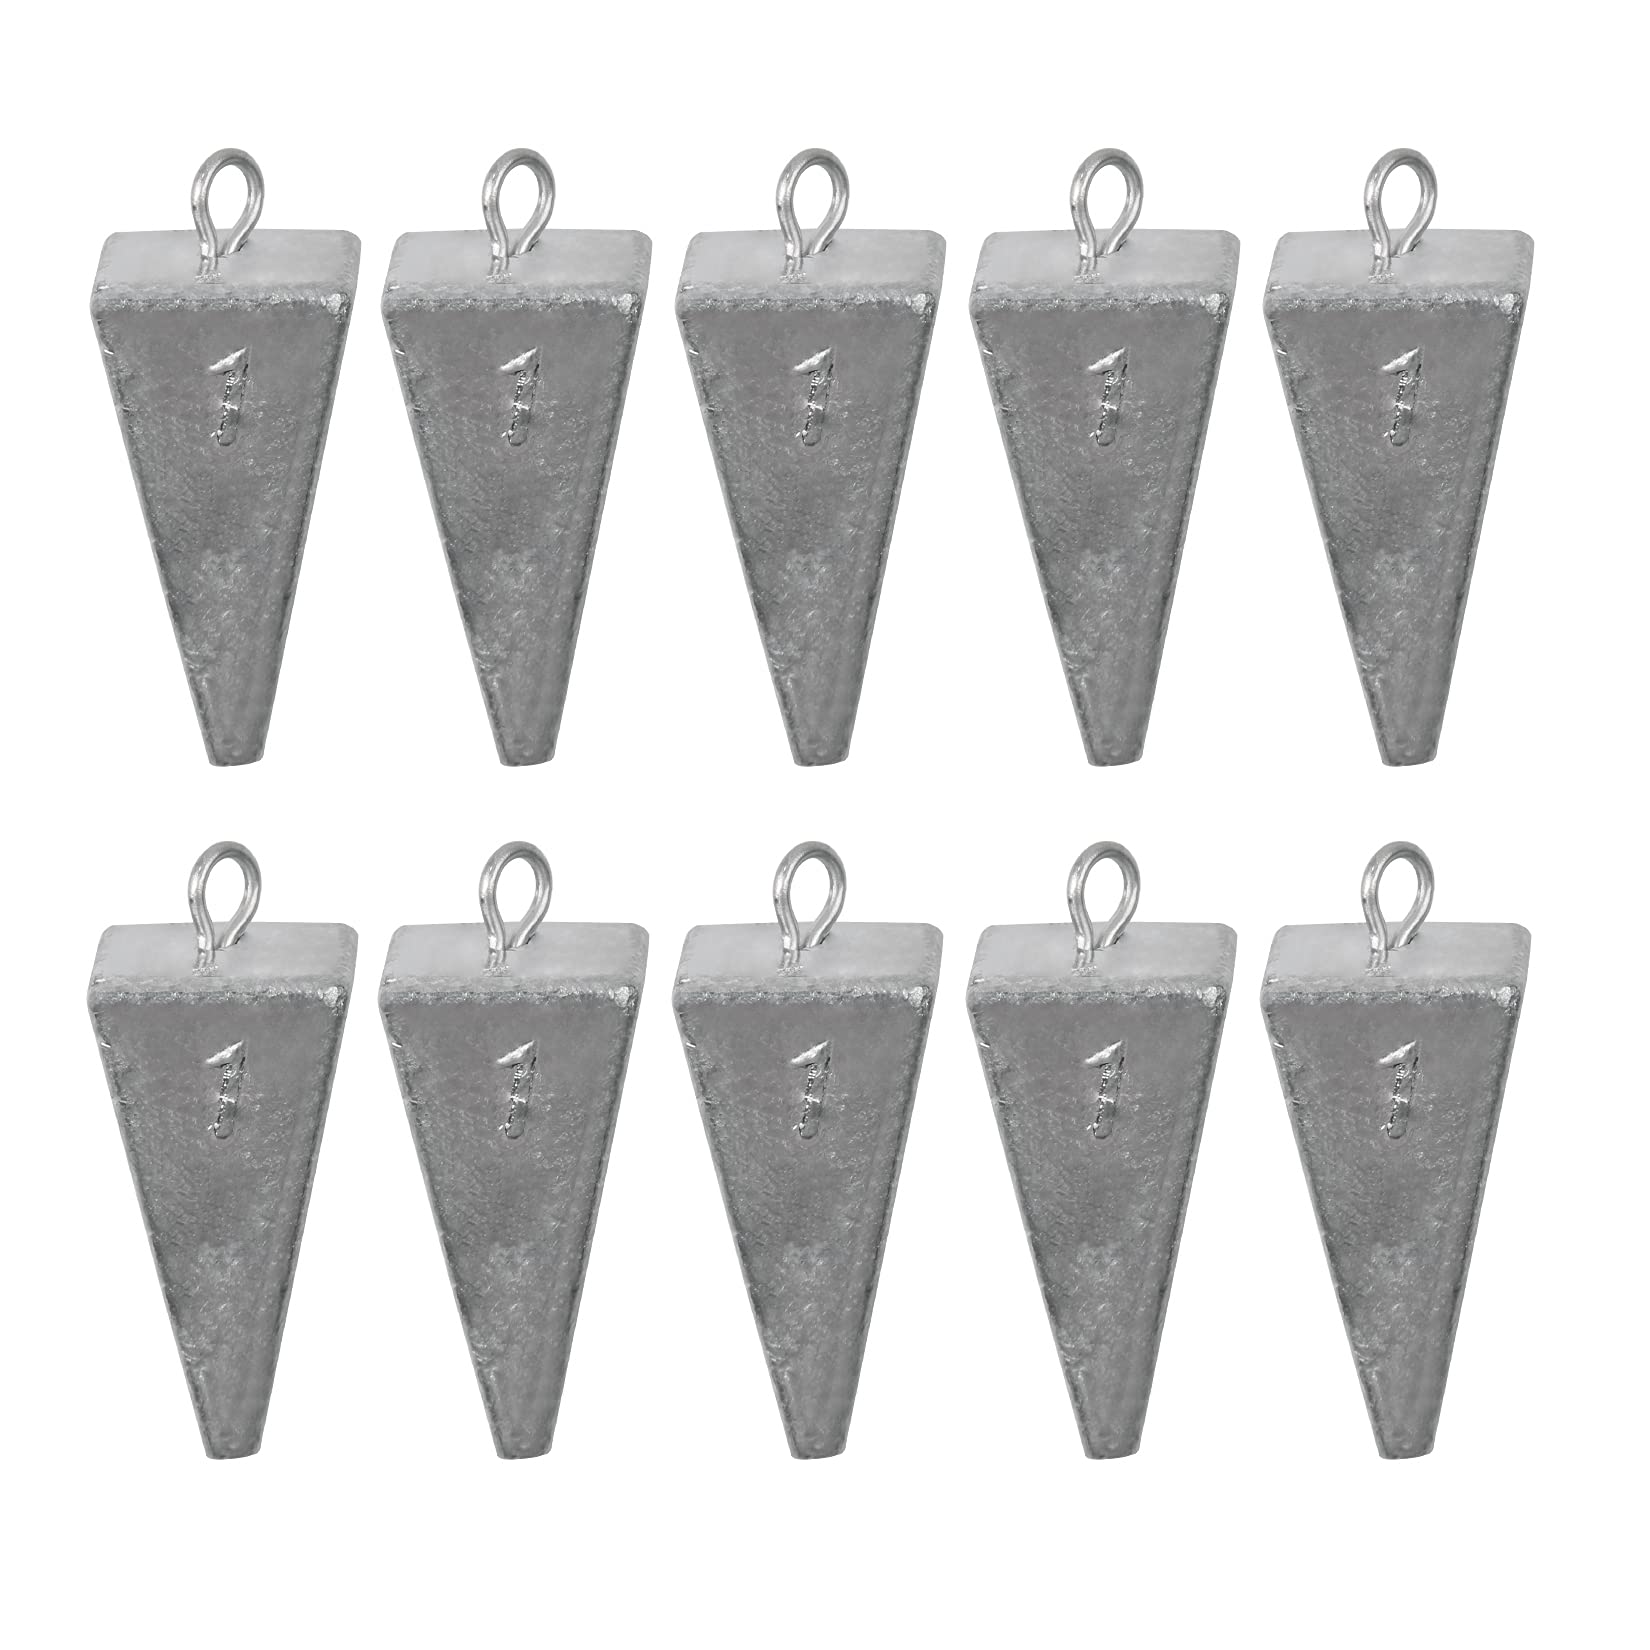 Pyramid Sinkers Fishing Weights Kit Bullet Fishing Weights Sinkers